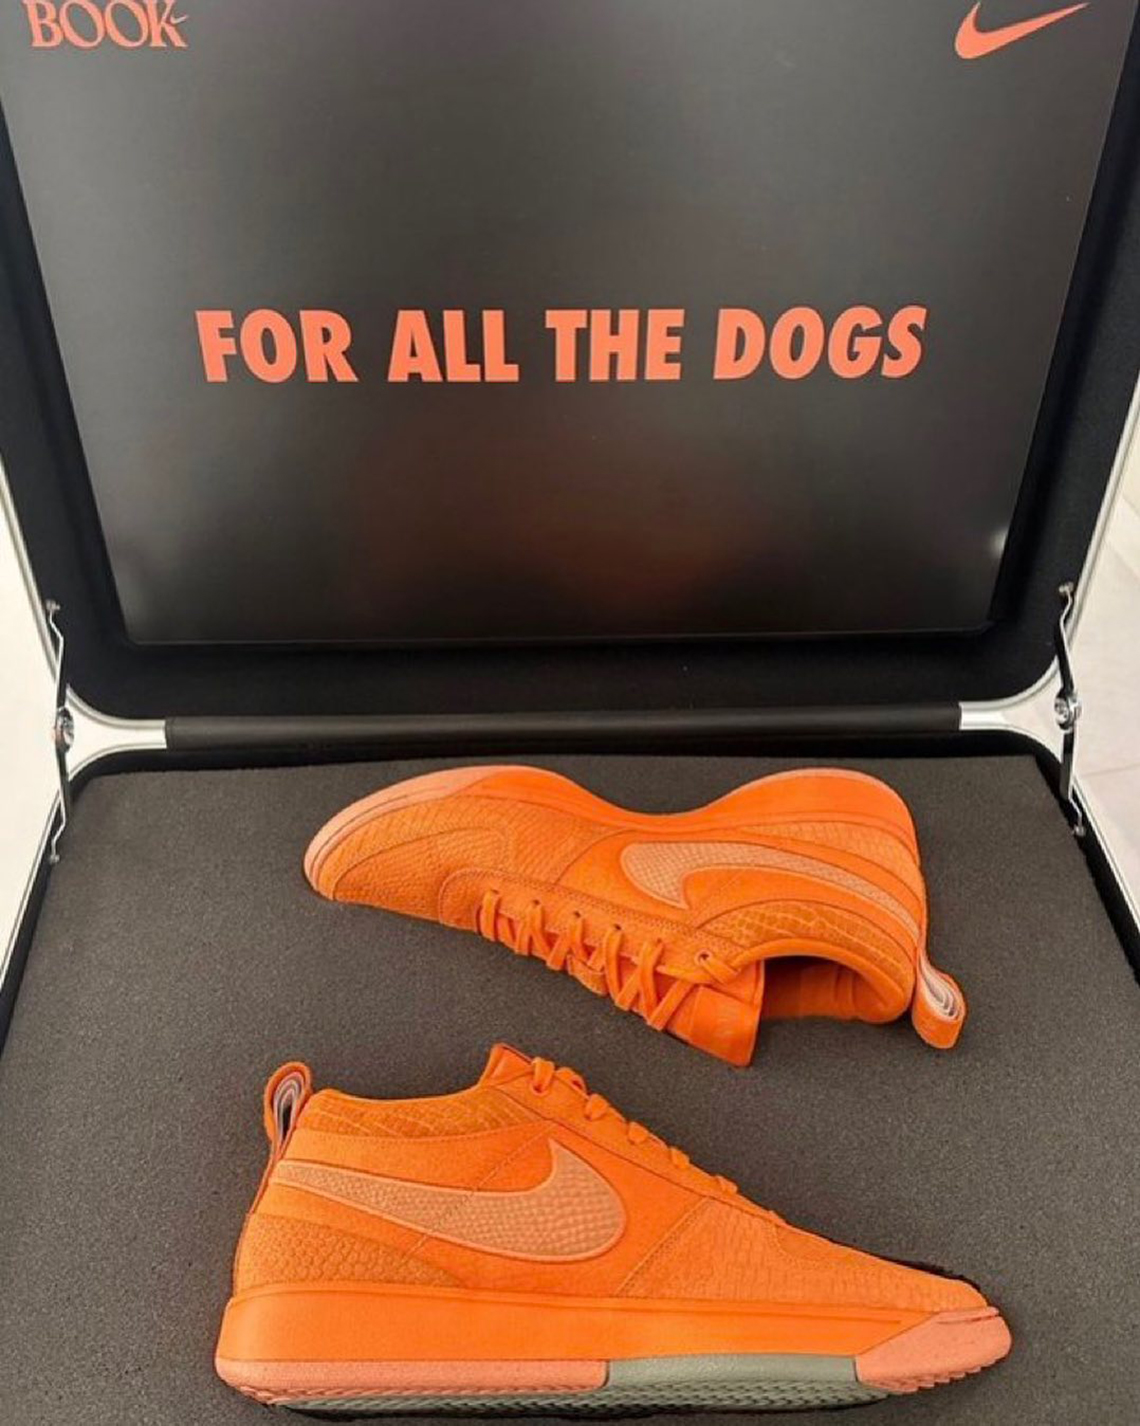 Nike Book 1 For All The Dogs 1